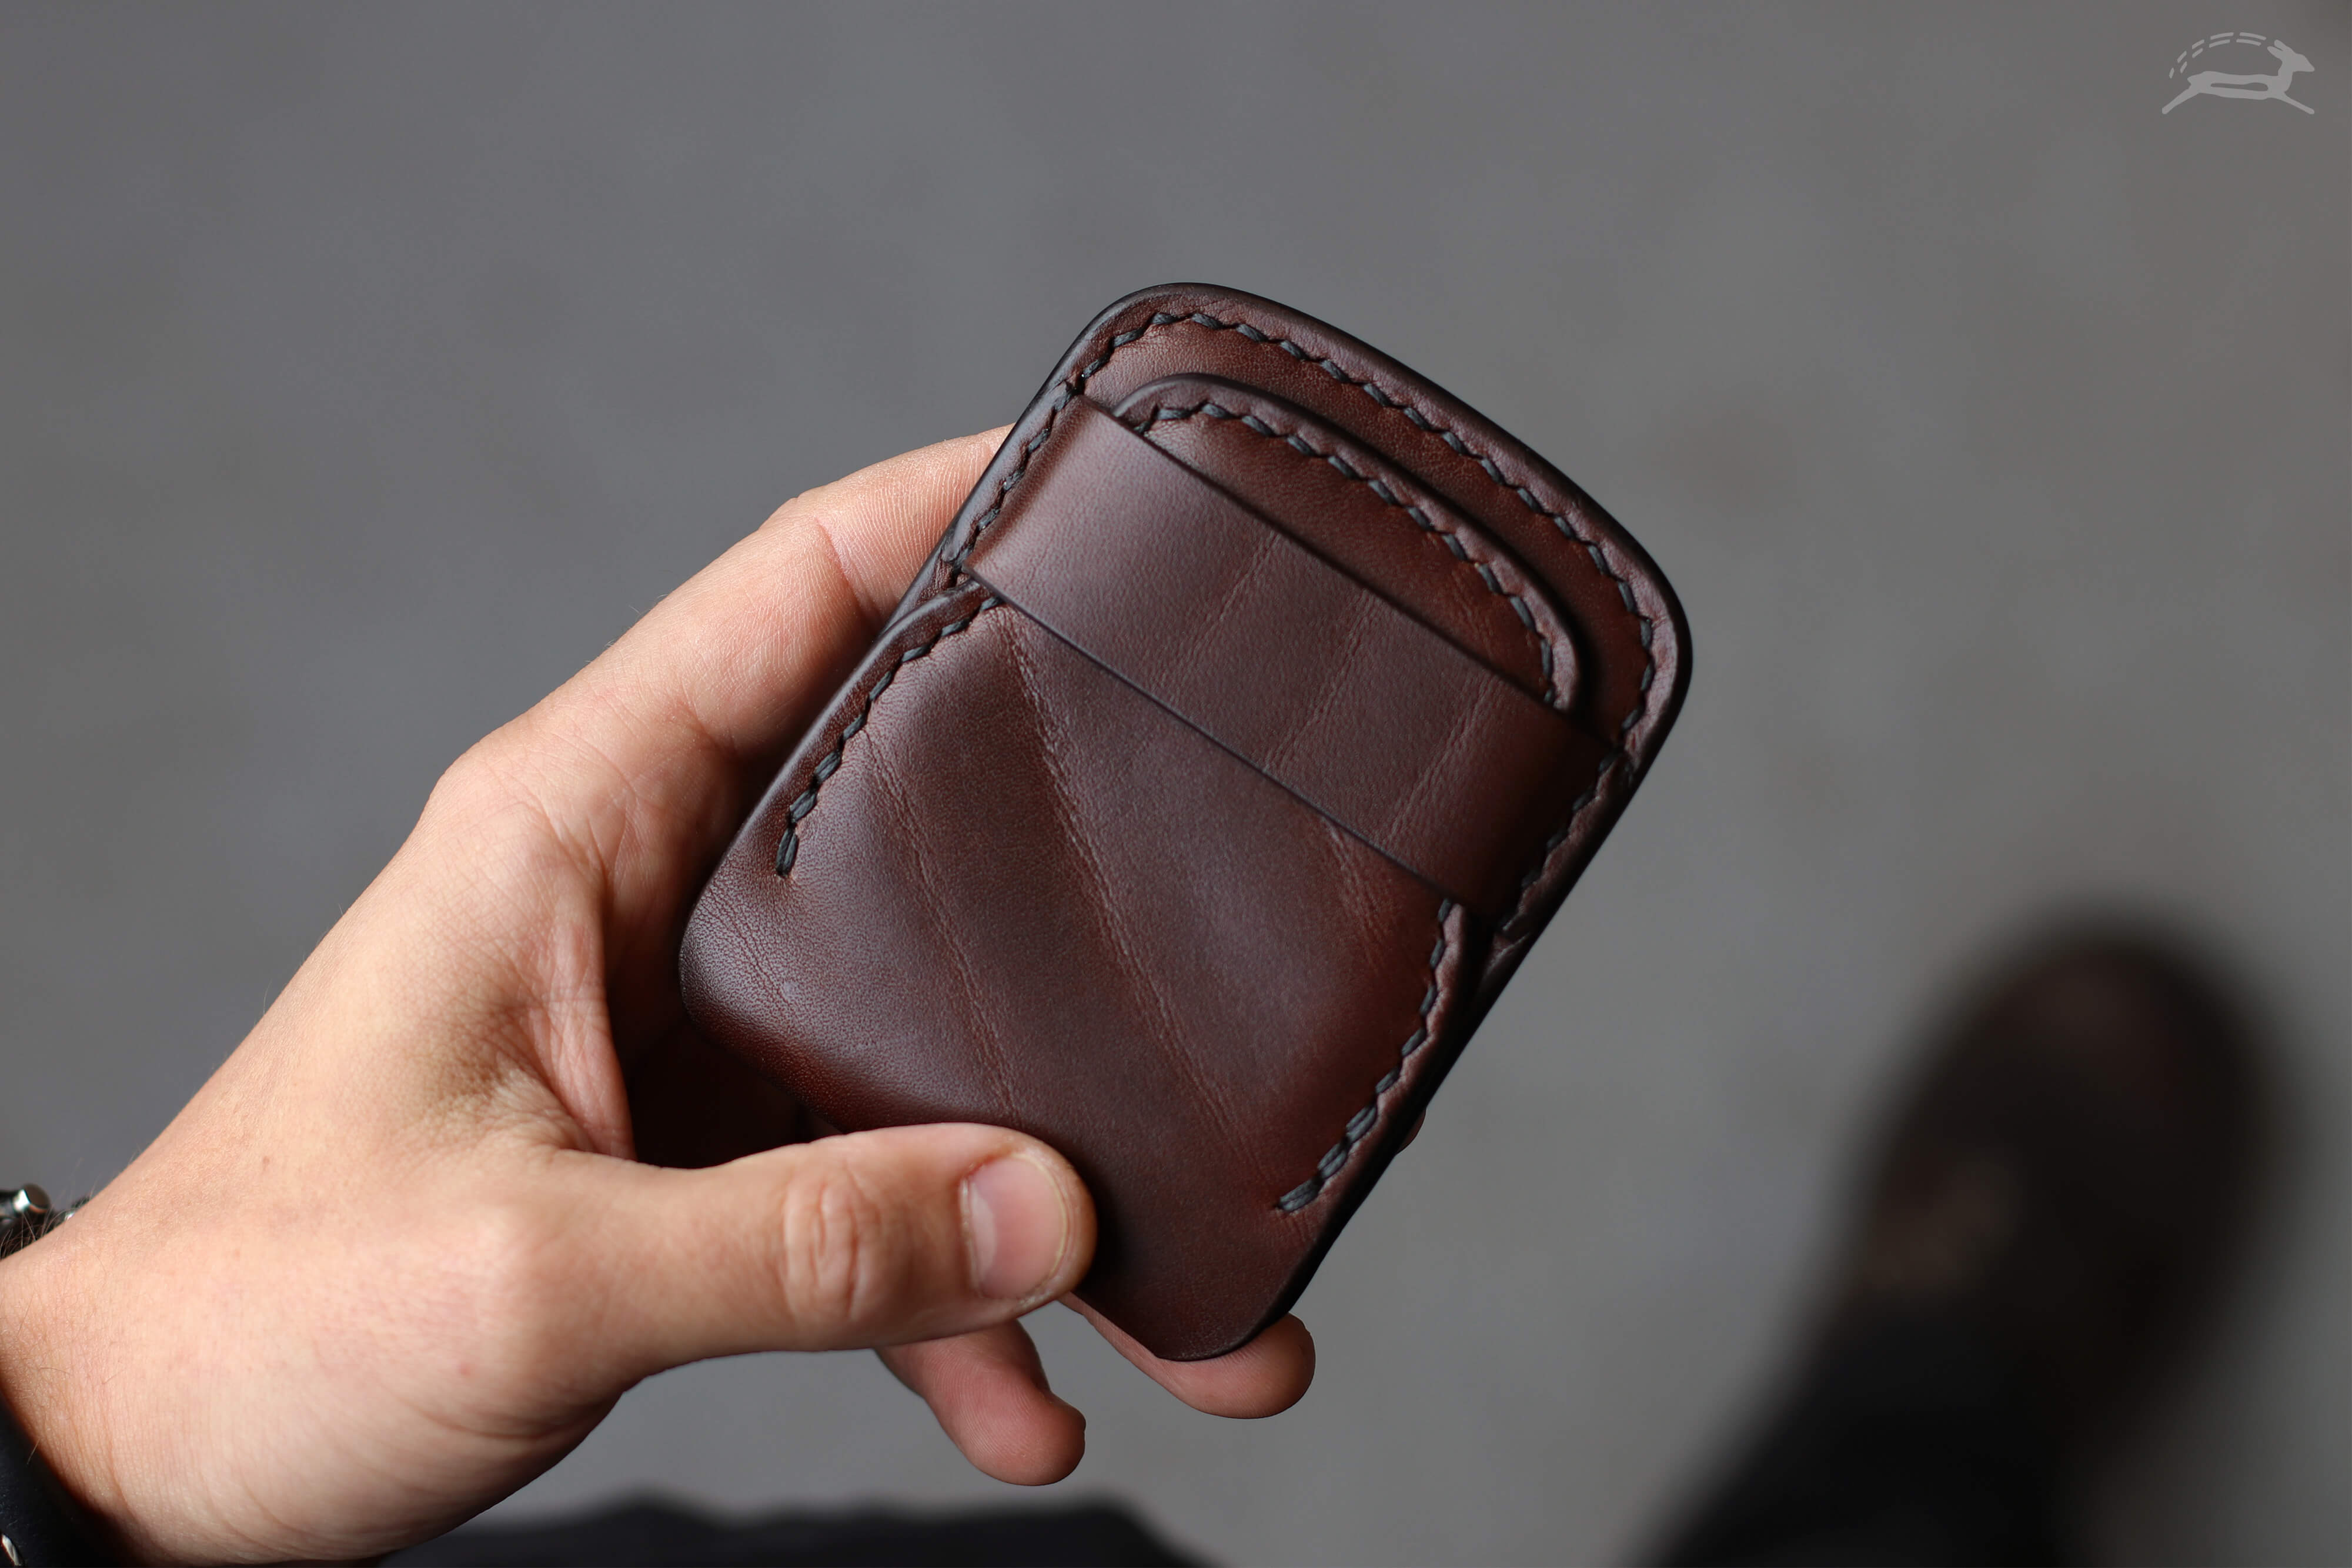 rich chocolate brown leather handmade wallet - OCHRE handcrafted